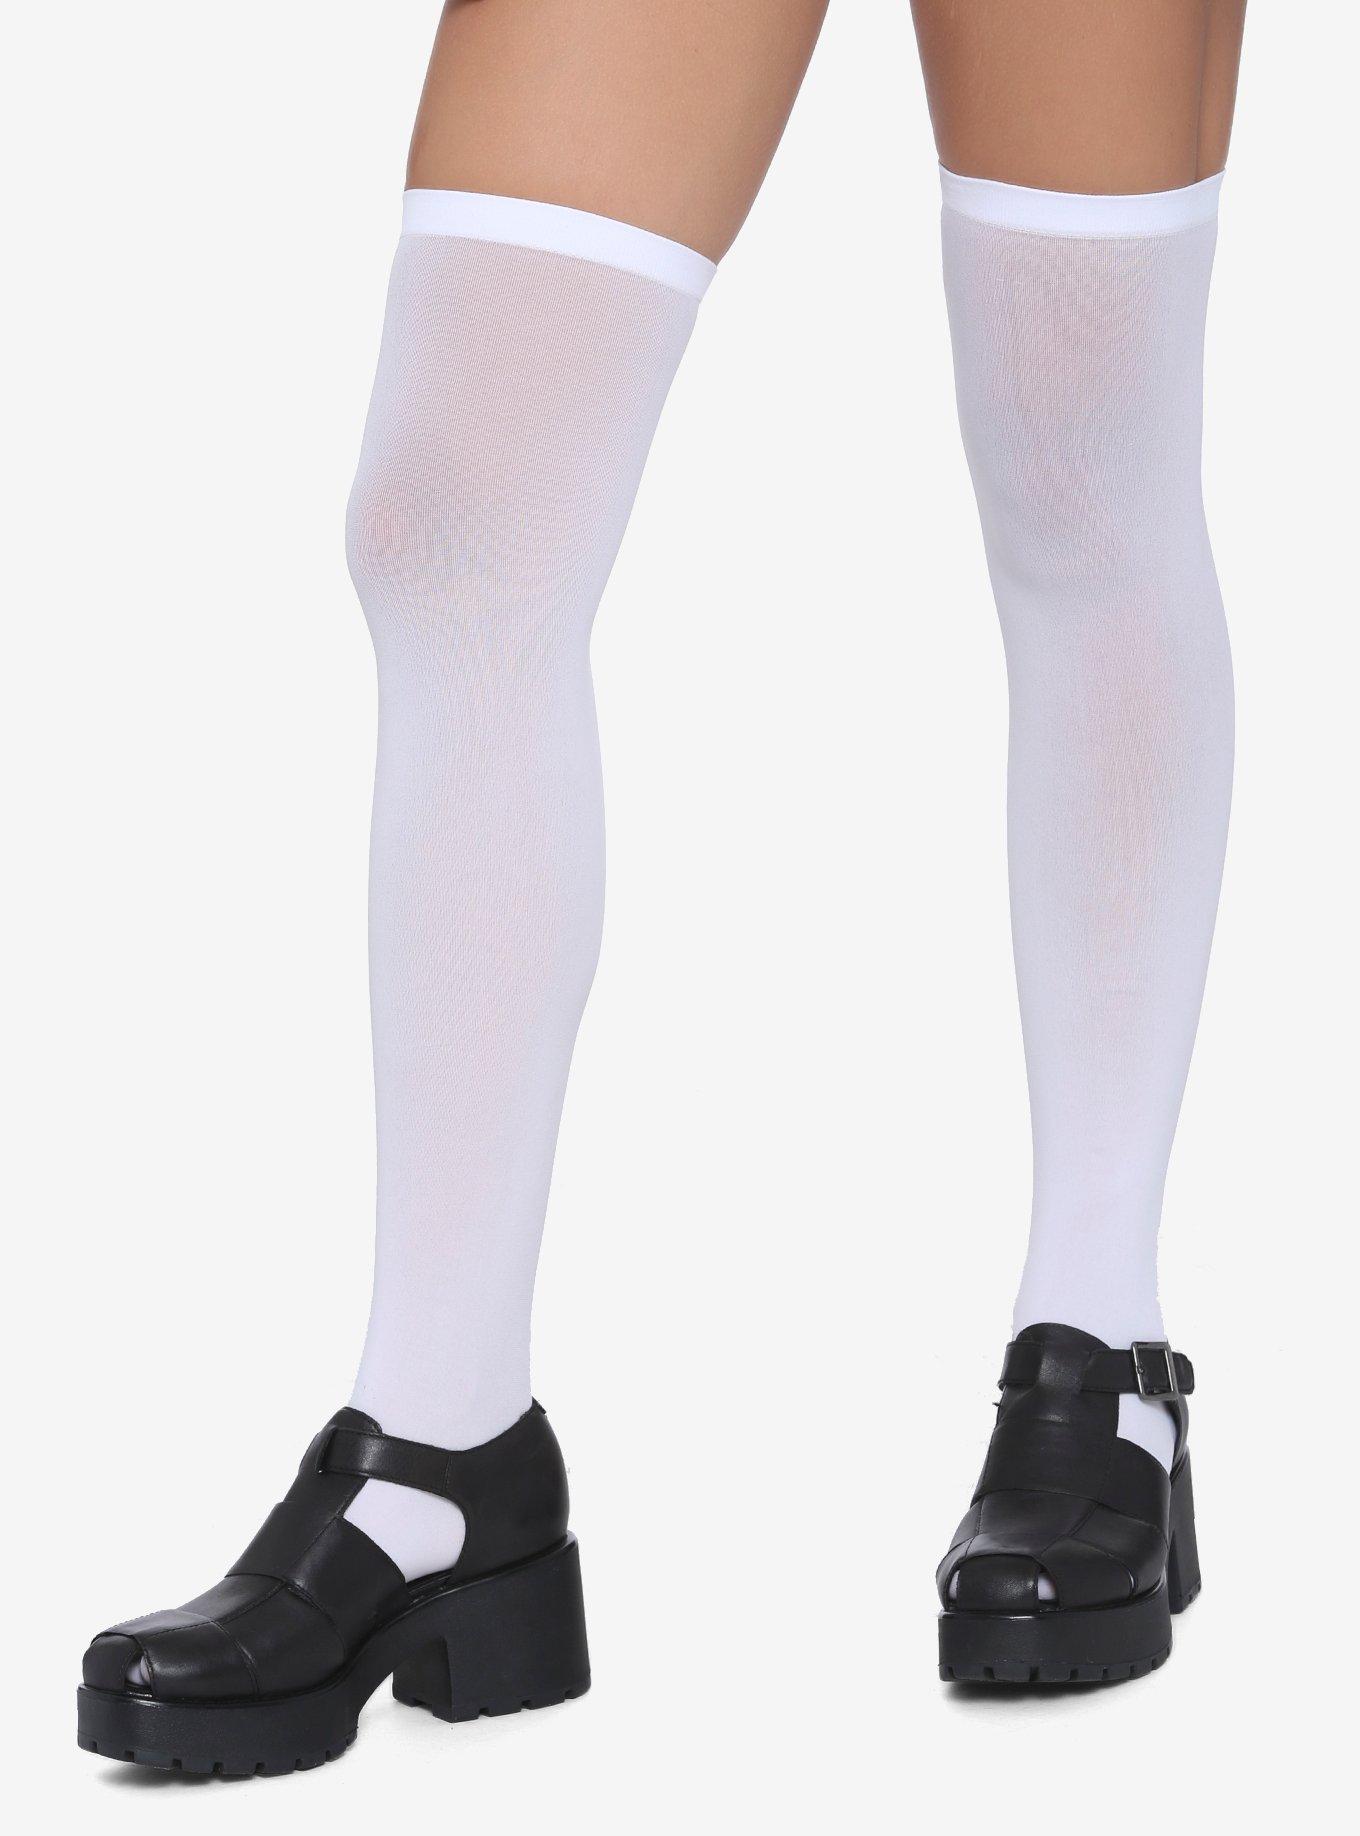 Madame X Fishnet Thigh High Stockings in White